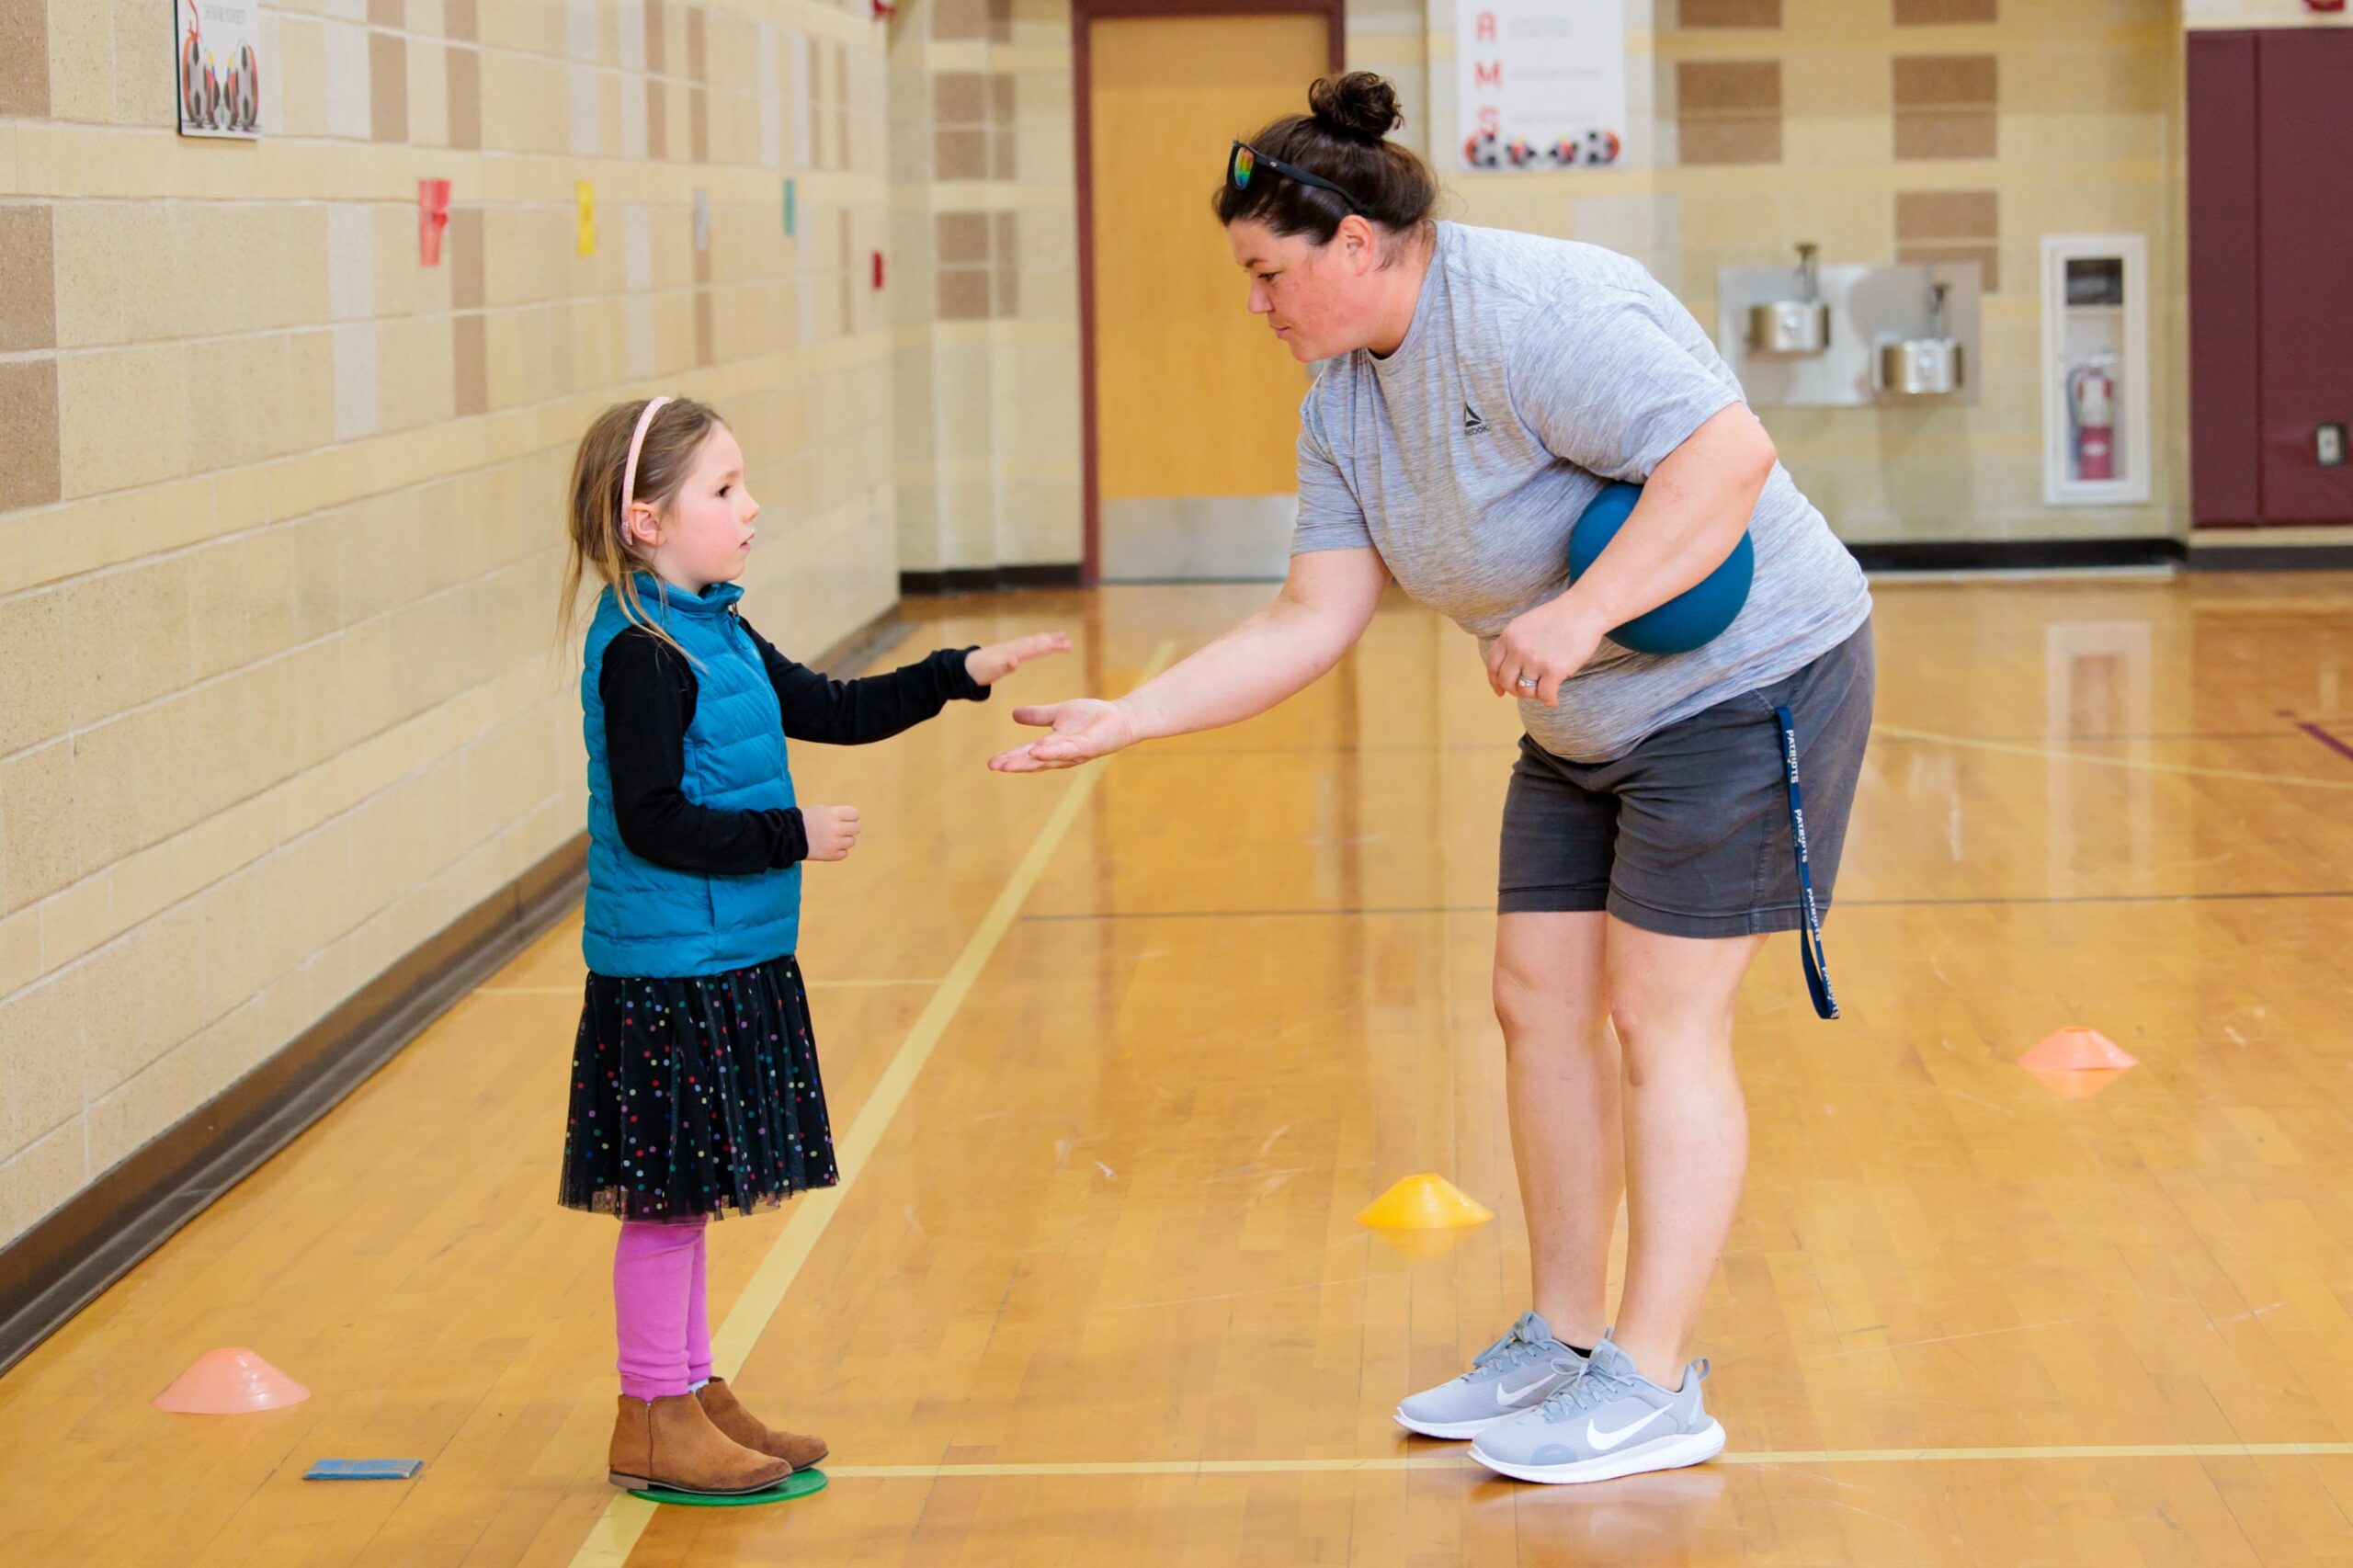 A kindergarten student plays kickball during fitness and health class